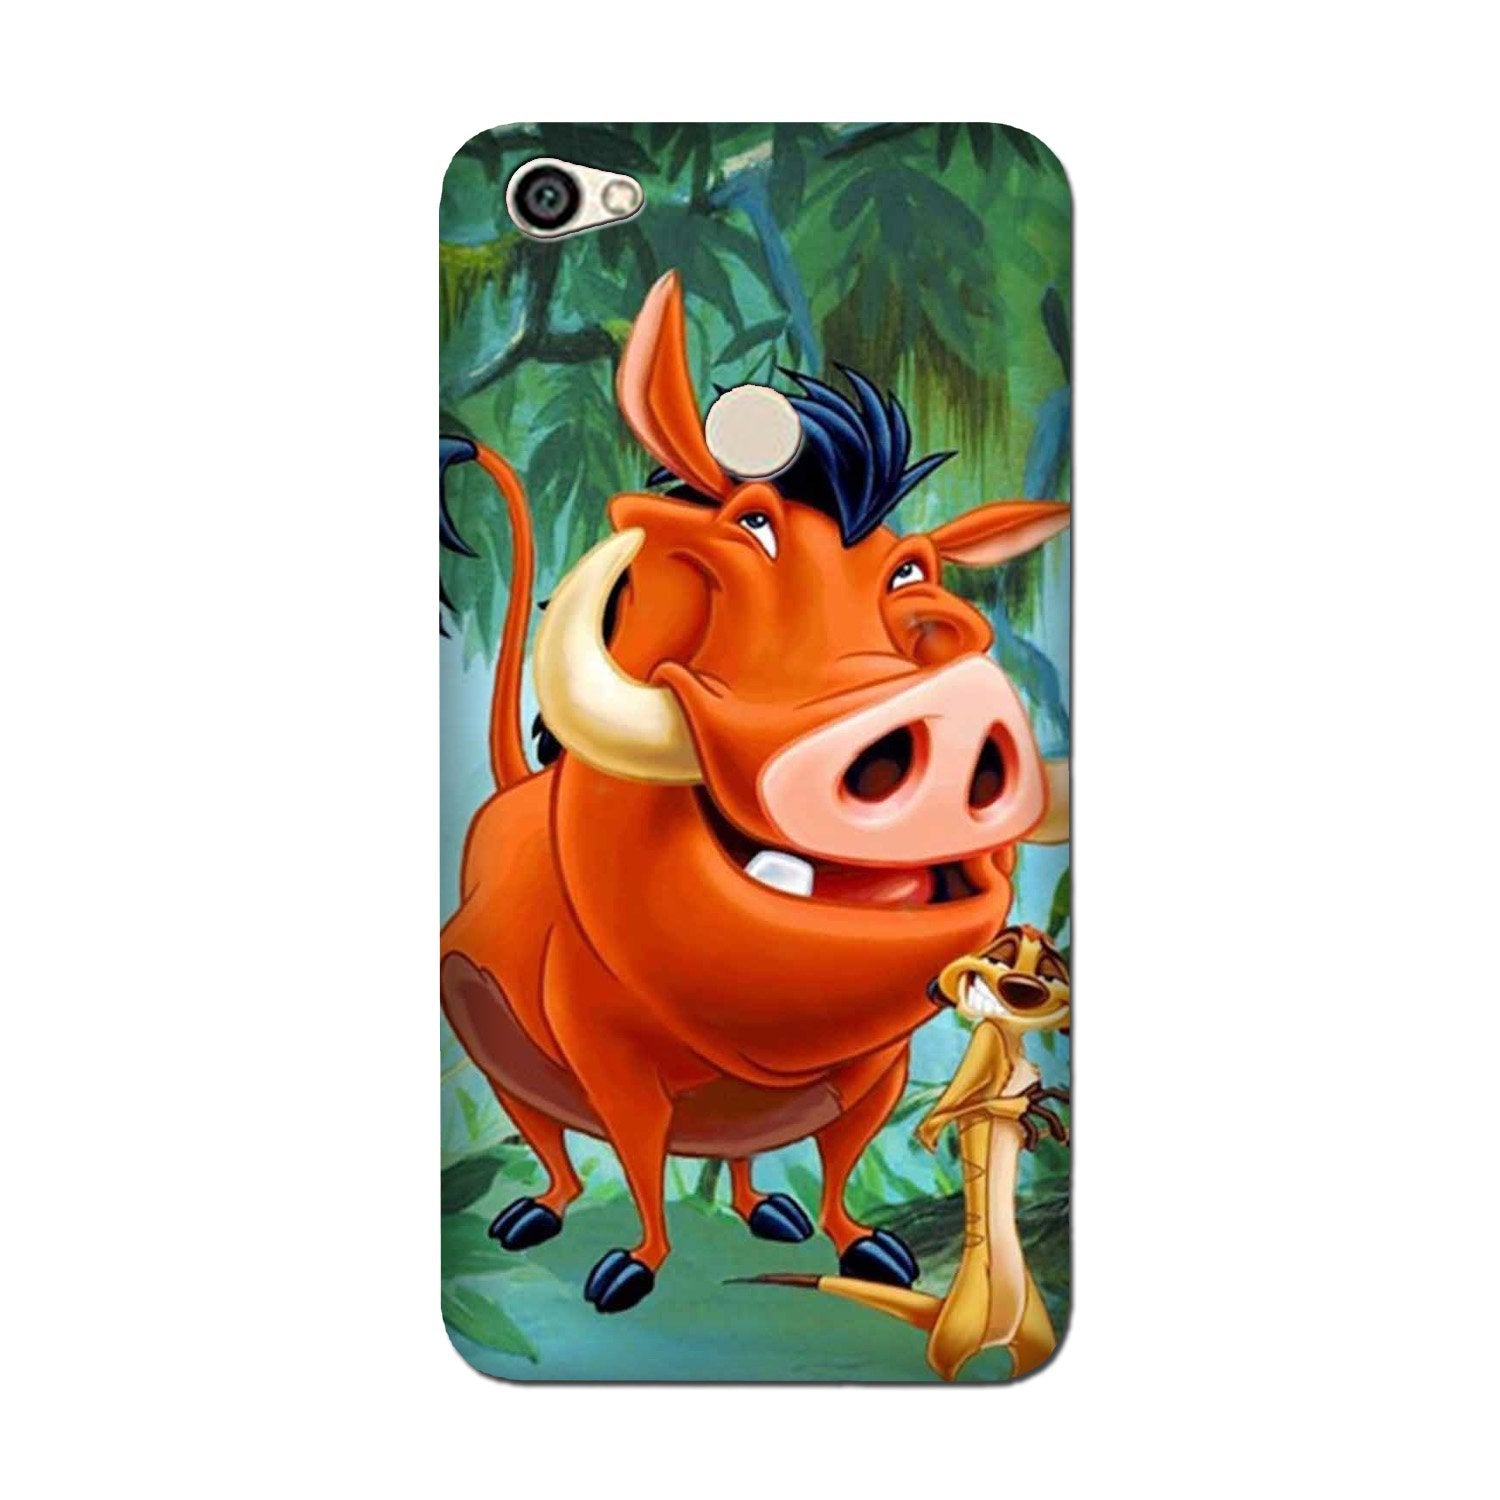 Timon and Pumbaa Mobile Back Case for Vivo Y83/ Y81 (Design - 305)